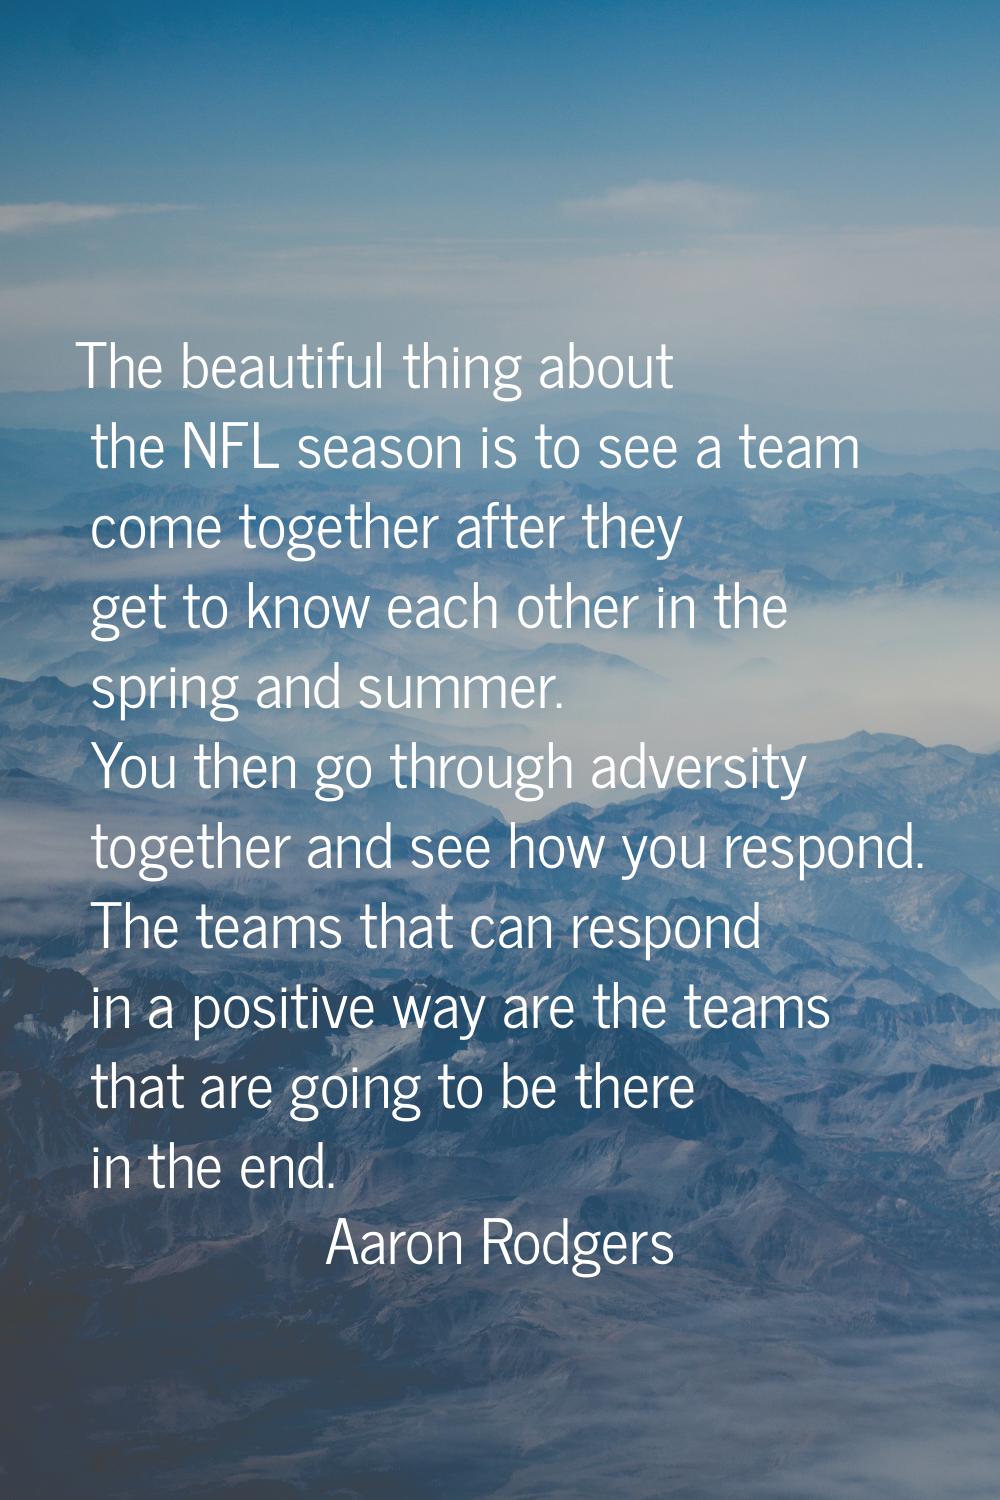 The beautiful thing about the NFL season is to see a team come together after they get to know each